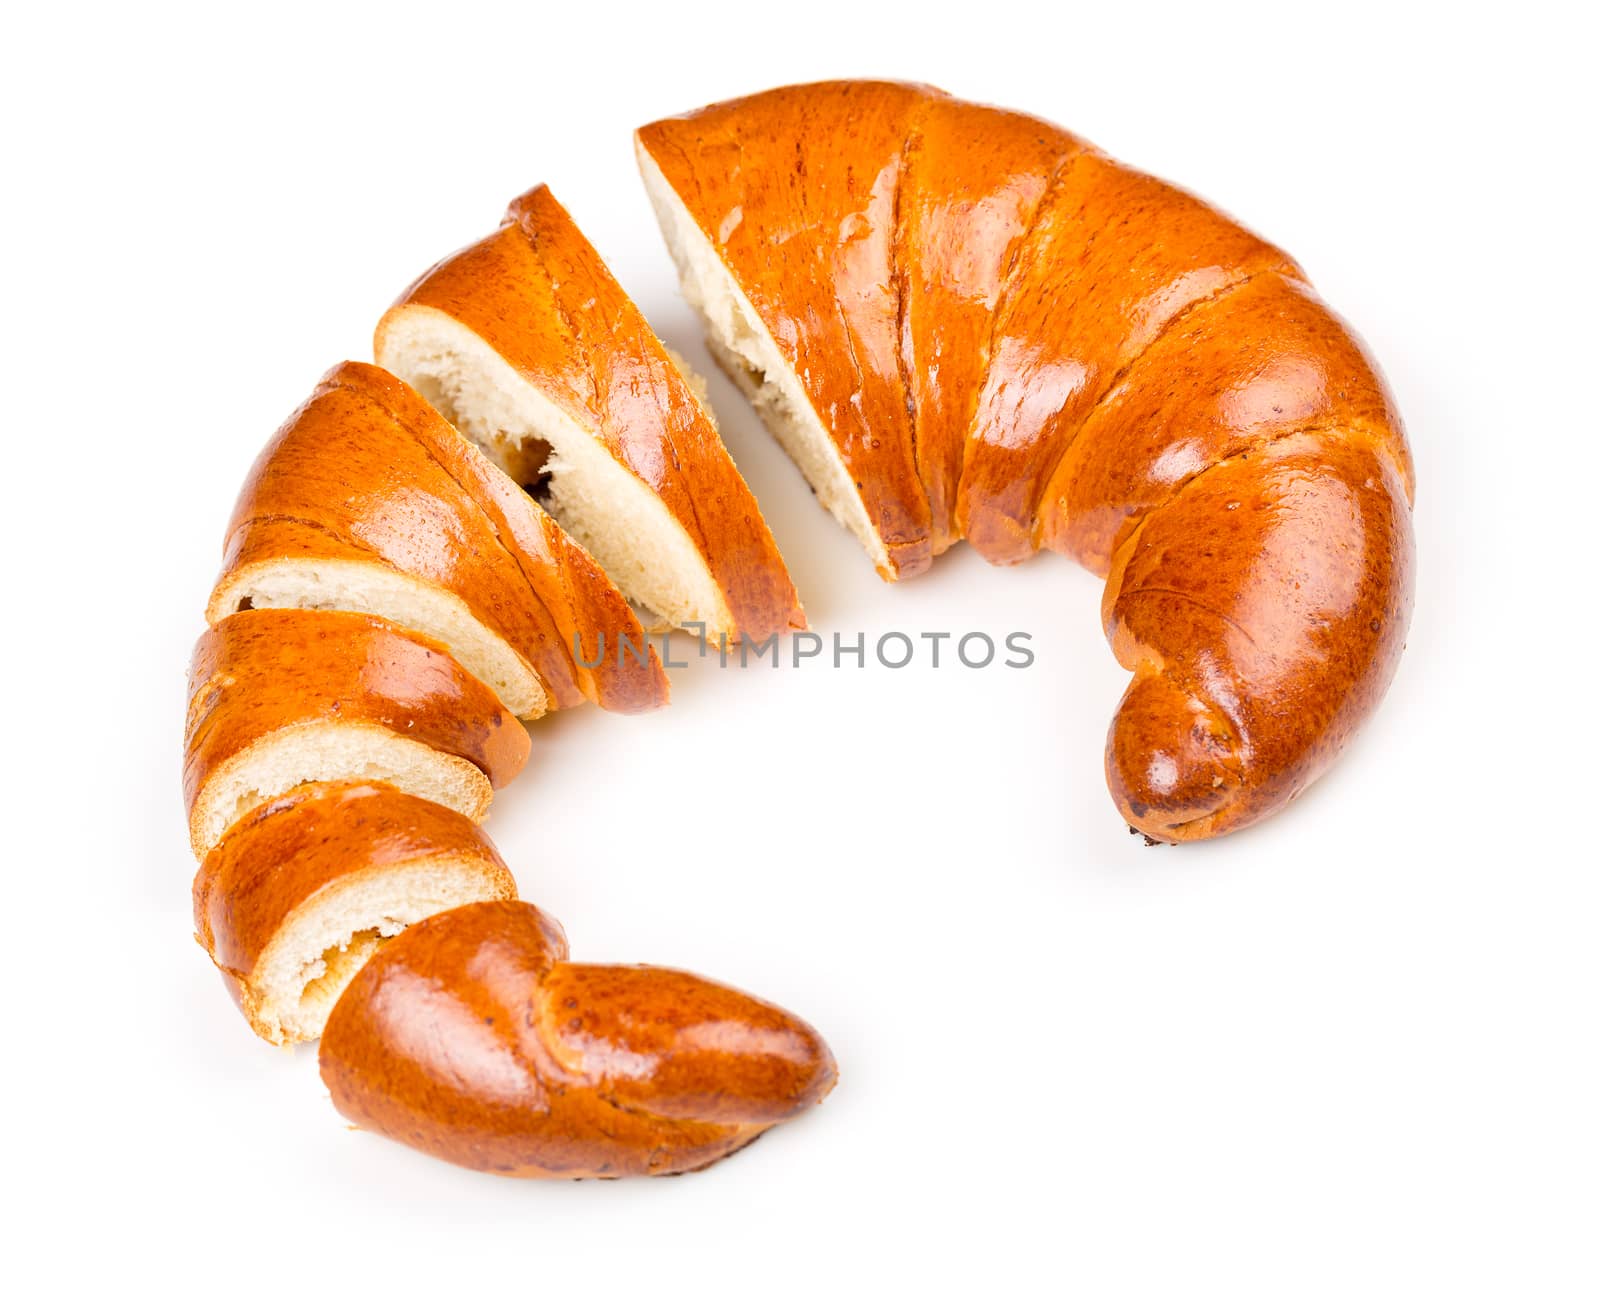 Fresh and tasty bagel with jam sliced ??pieces over white background